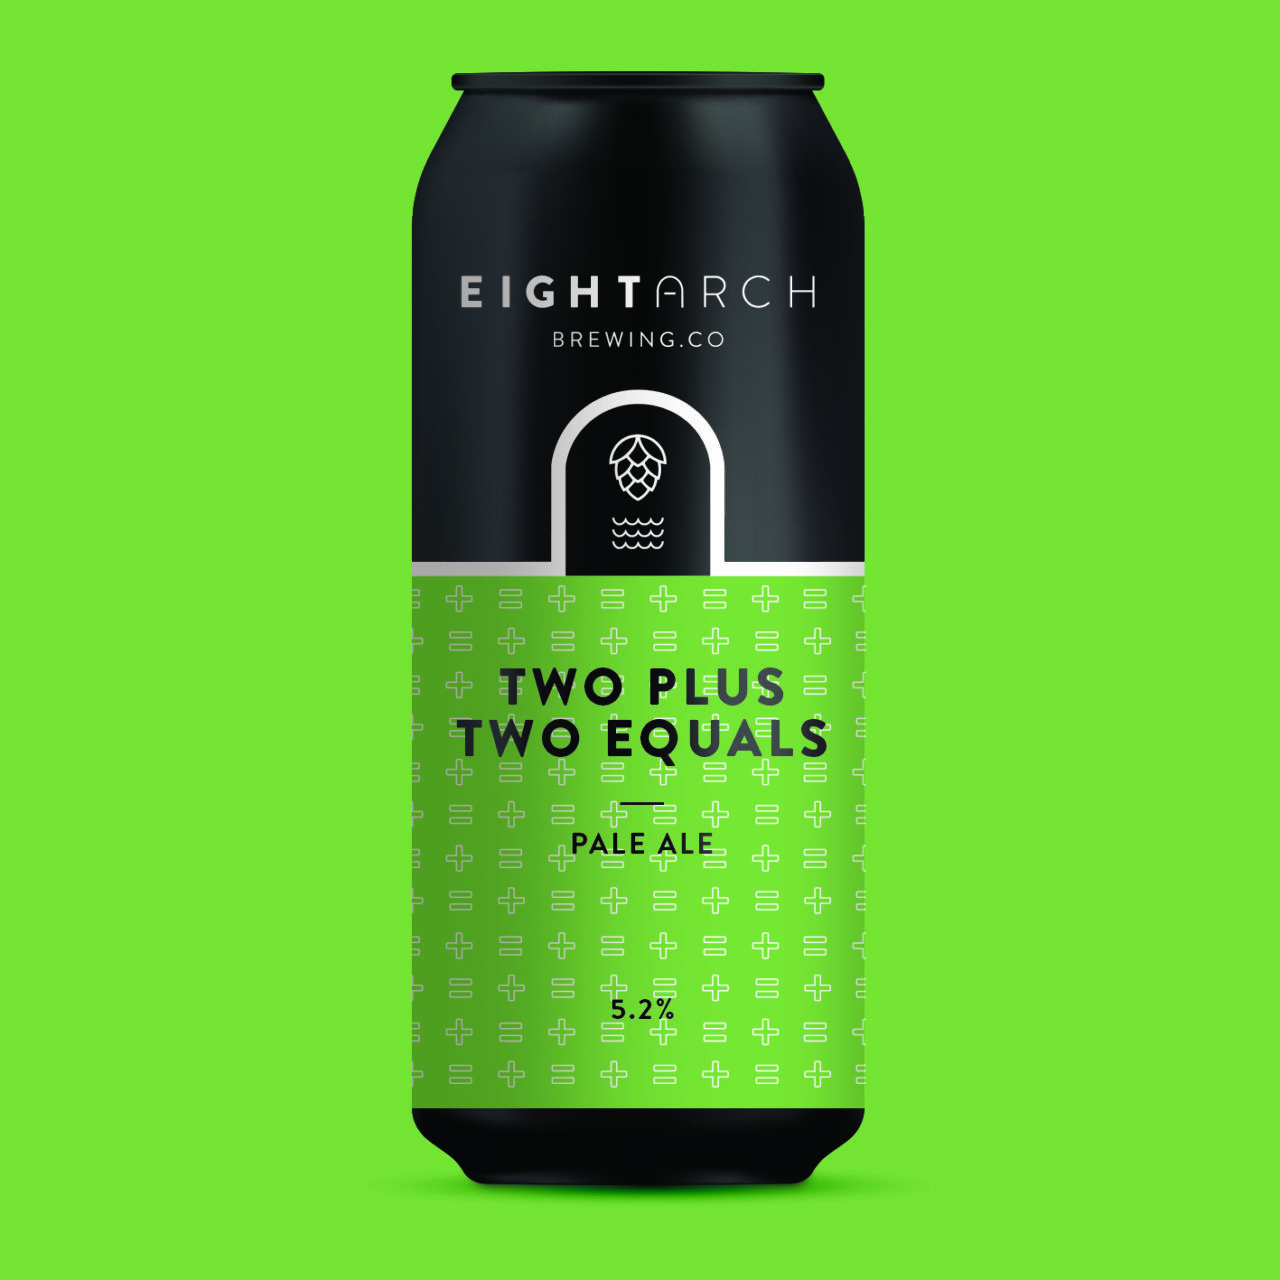 https://www.8archbrewing.co.uk/wp-content/uploads/2021/10/Eight-Arch-Brewing-Co-Two-Plus-Two-Equals-Pale-Ale-Colour-1280x1280.jpg